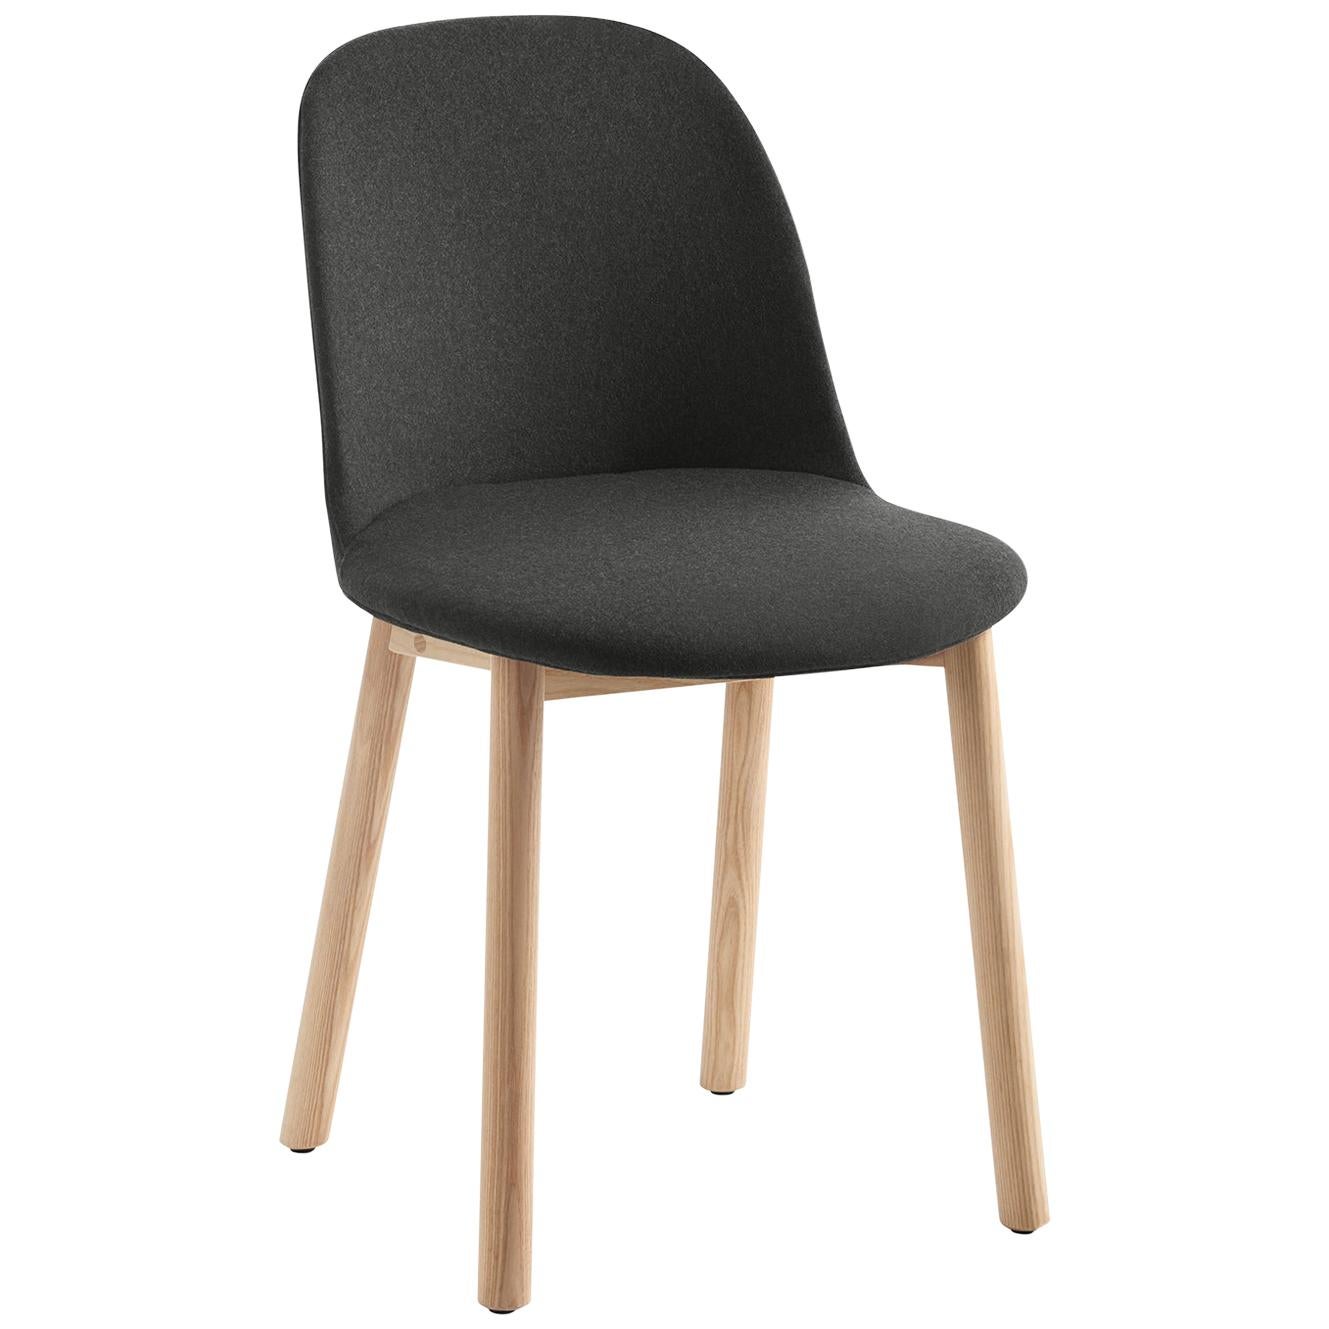 Emeco Alfi High Back Chair in Black Wool with Natural Frame by Jasper Morrison